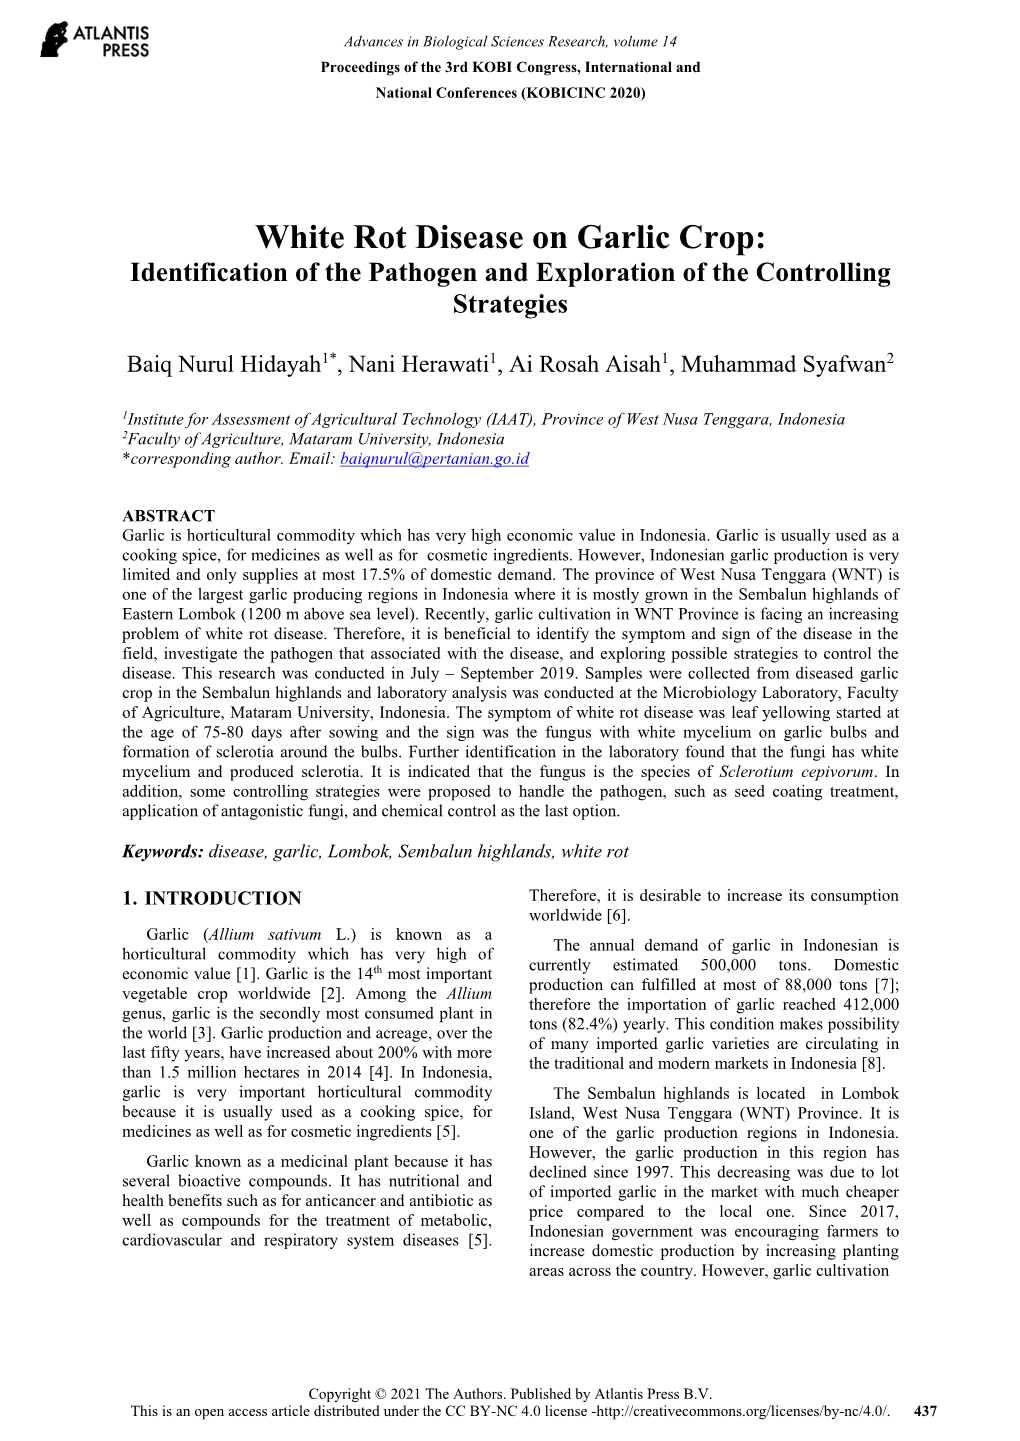 White Rot Disease on Garlic Crop: Identification of the Pathogen and Exploration of the Controlling Strategies